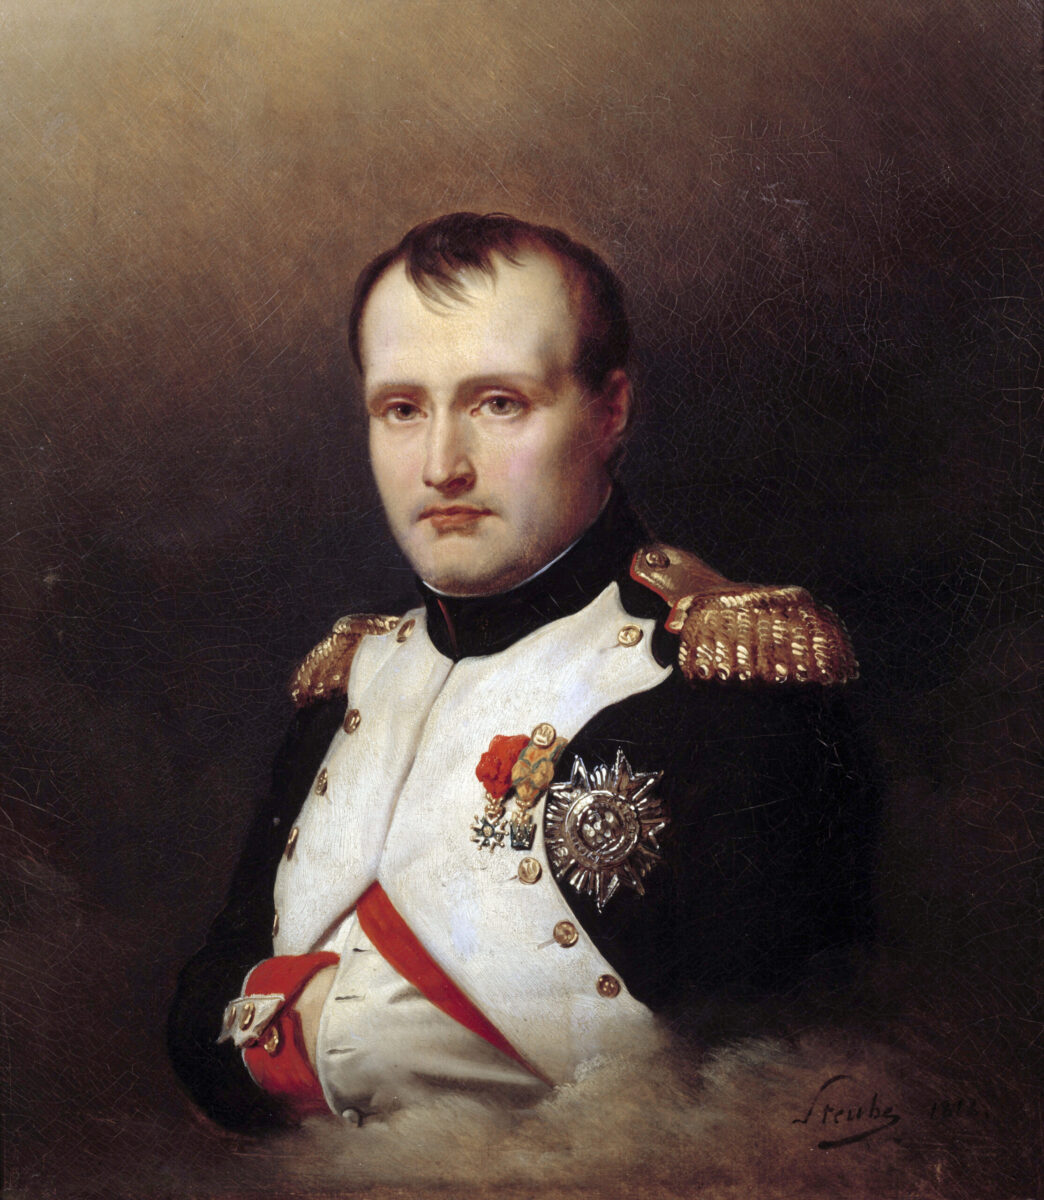 According to records the reason why Napoleon did choose to hide and conceal his hand in his coat for several reasons.